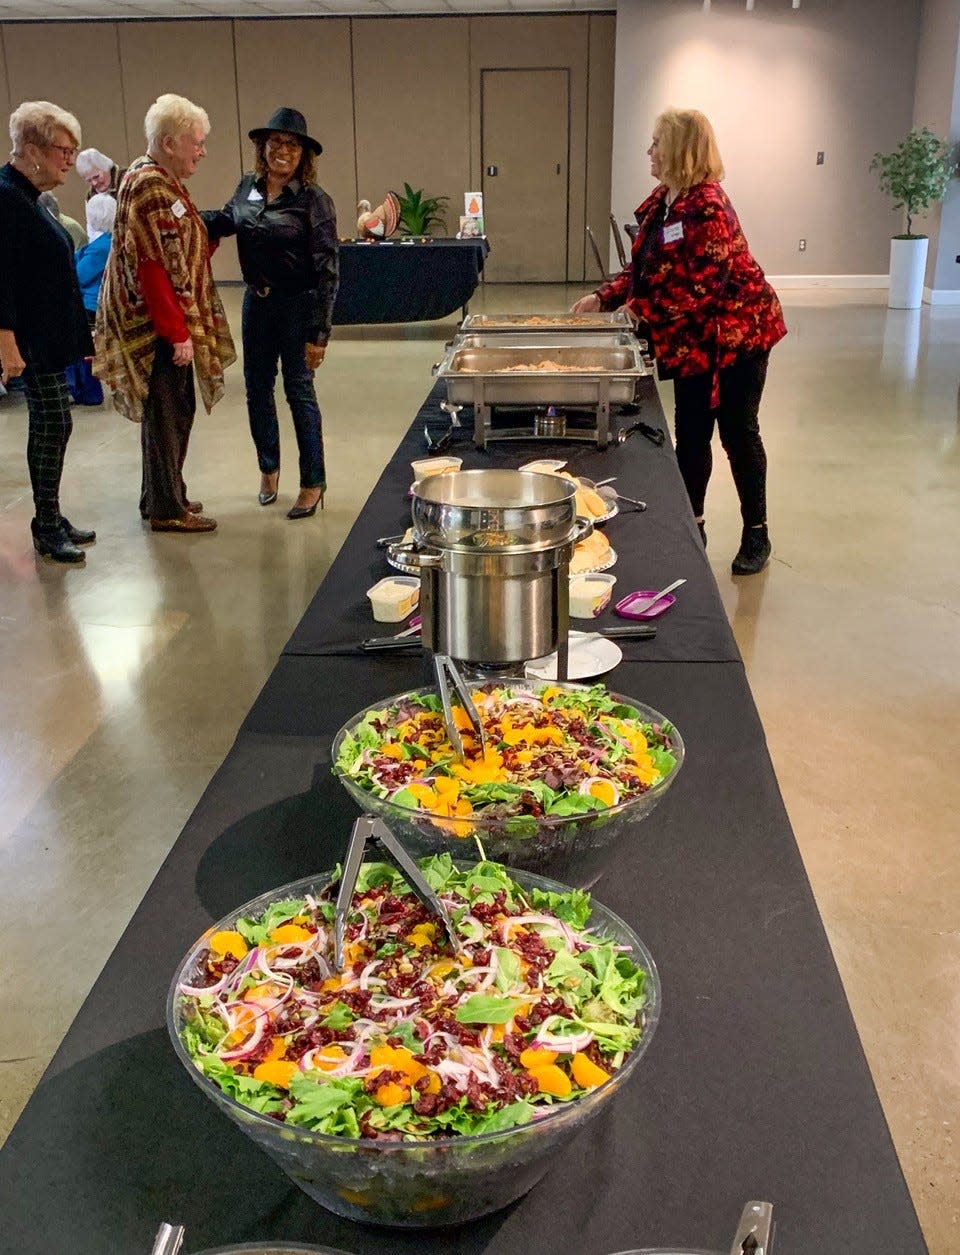 Guests at the Fremont Women’s Connection meeting enjoyed a Thanksgiving luncheon prepared by Lorena Jimenez.